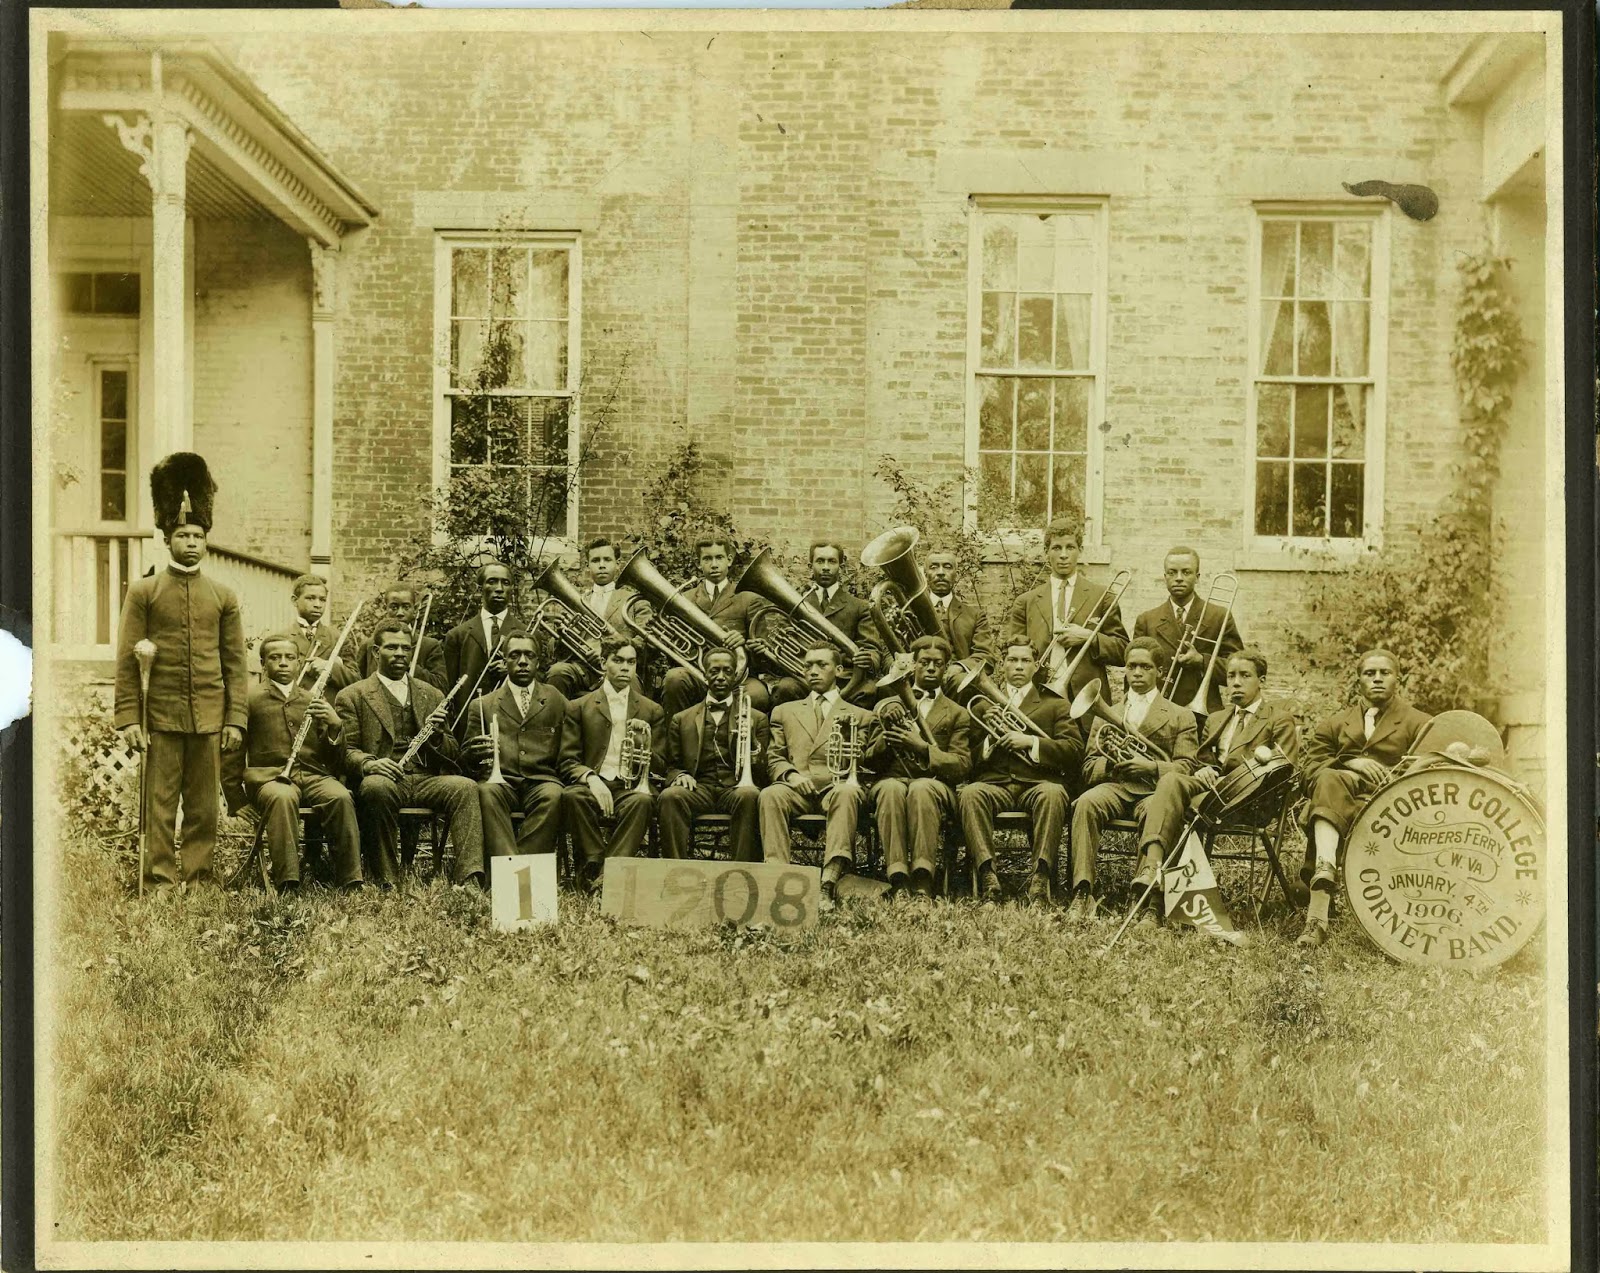 Group portrait of the Storer College Cornet Band in Harpers Ferry, Virginia, January 4, 1908.